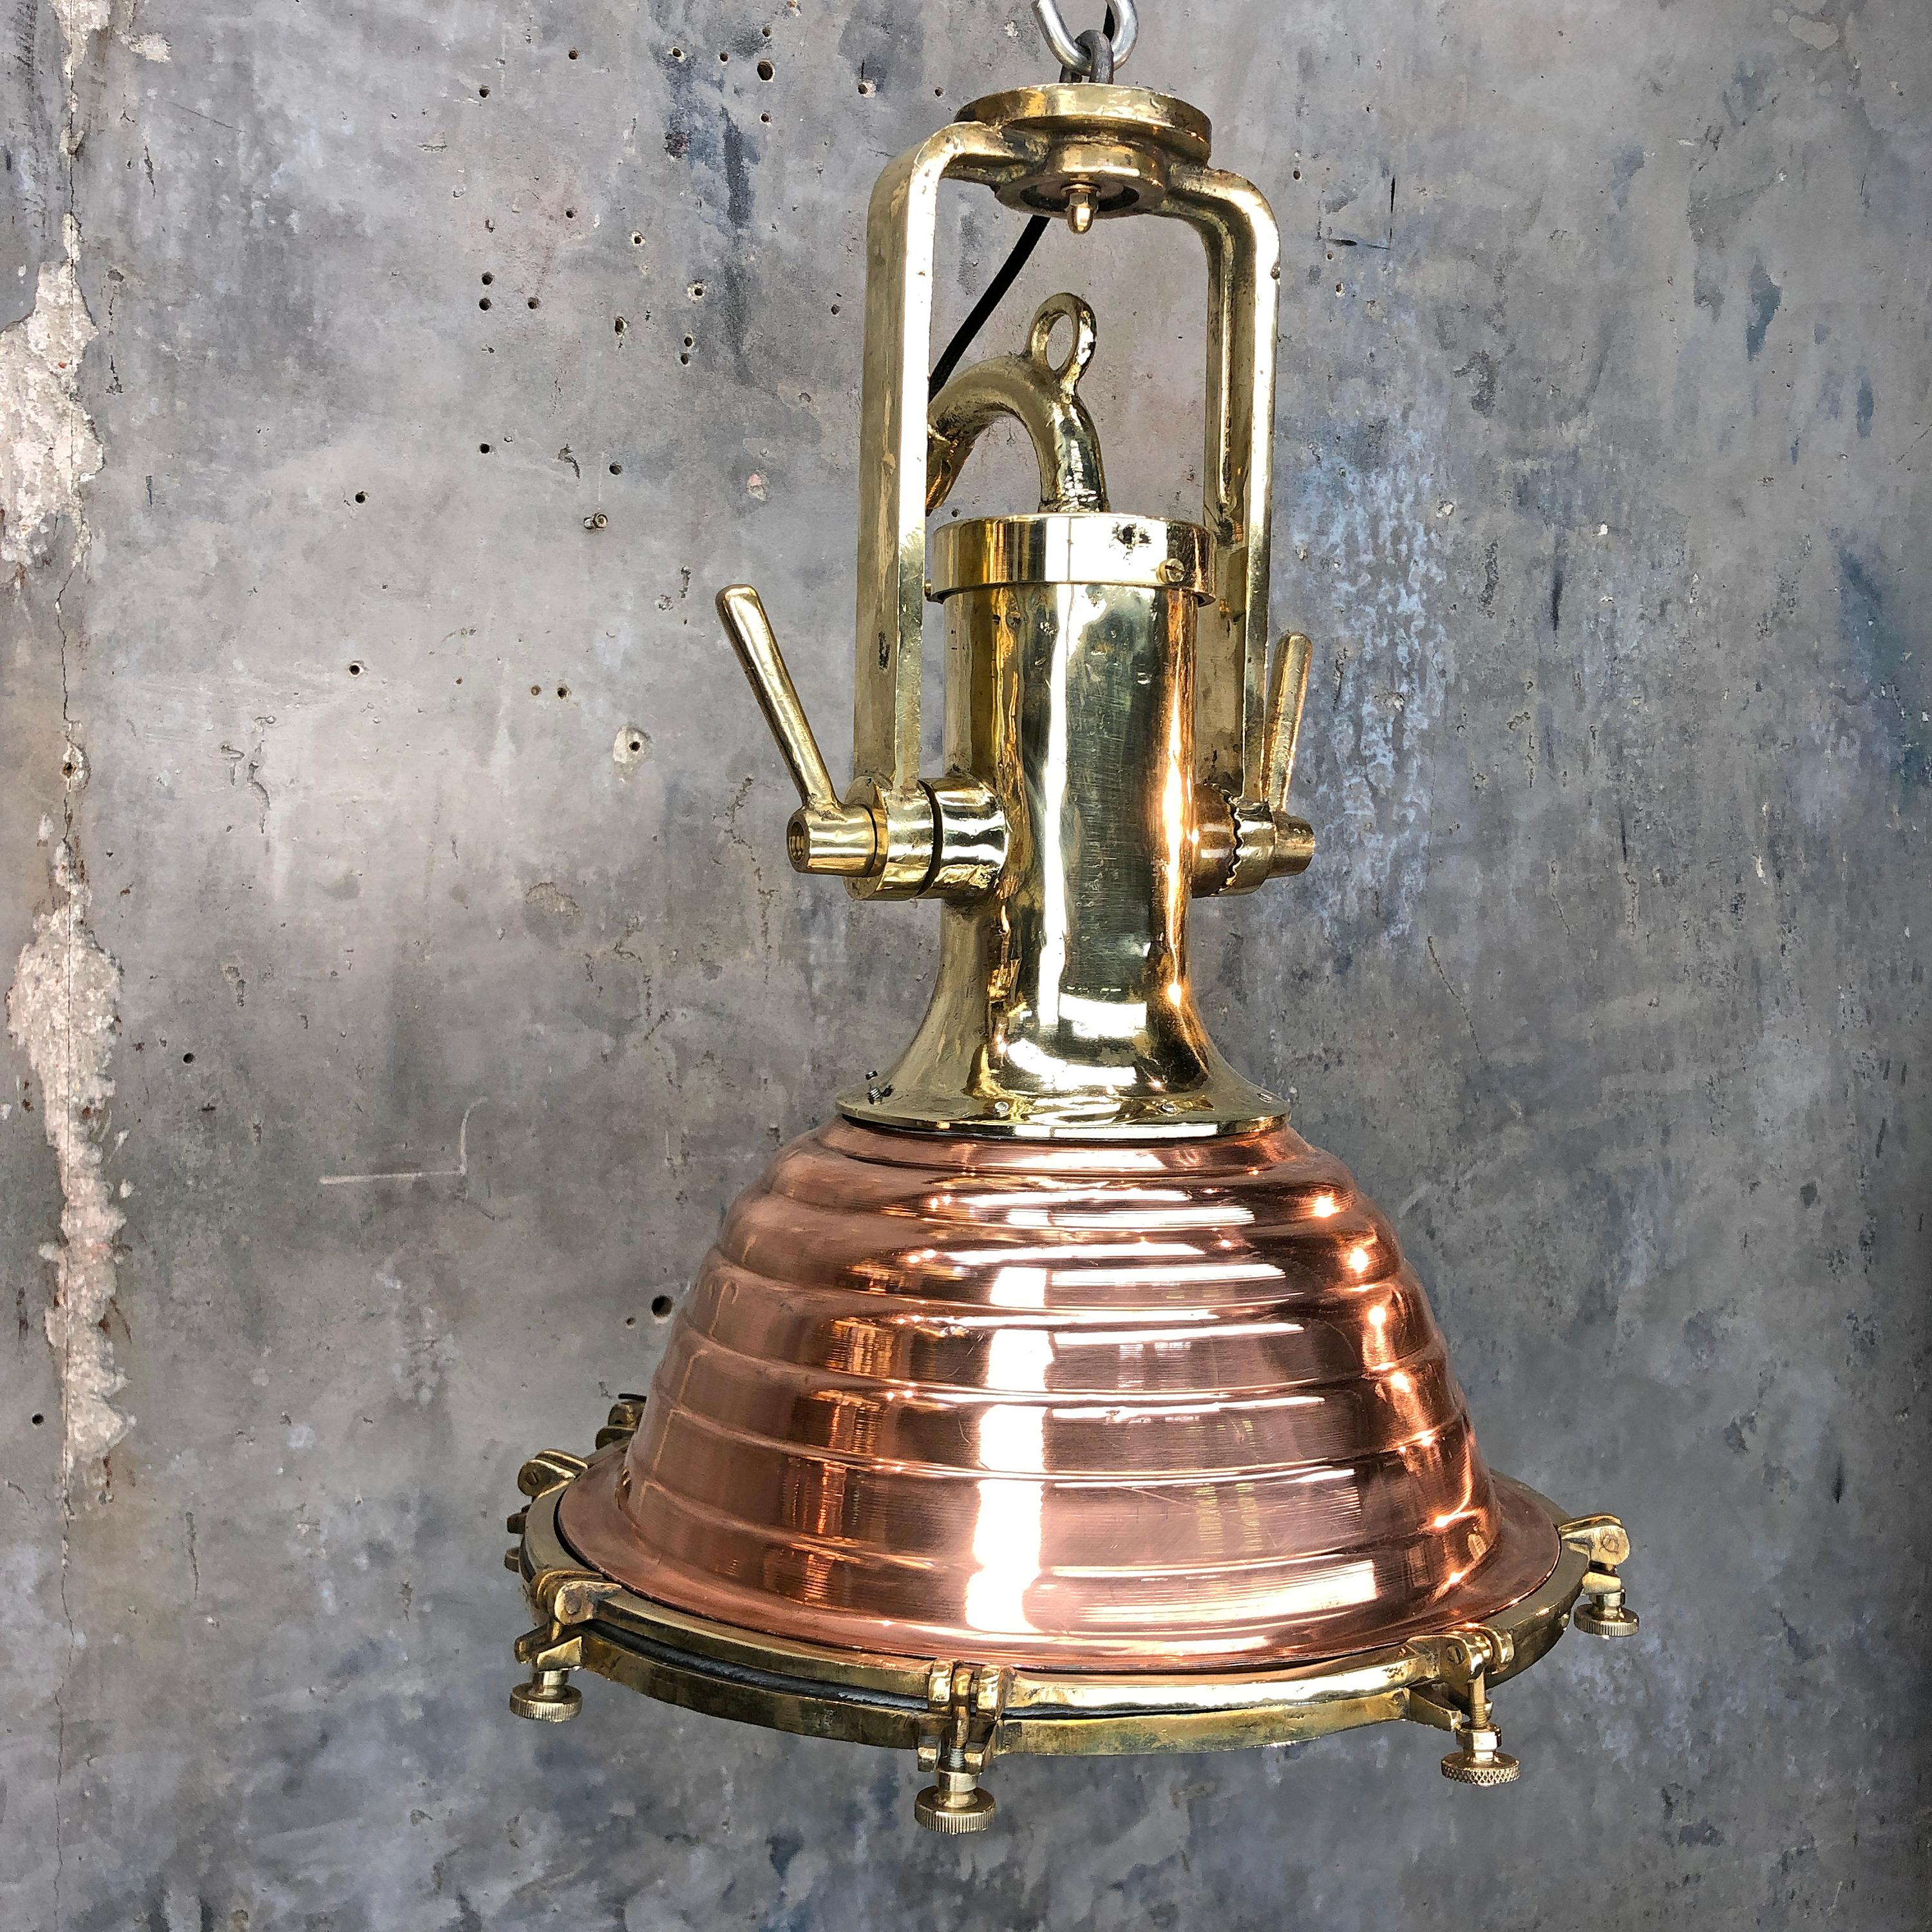 A reclaimed 1970s vintage industrial large copper and brass German cargo pendant.

Made by Wiska, a German manufacturer of industrial fixtures and fittings. Reclaimed from supertankers and professionally restored in the UK ready for use in modern